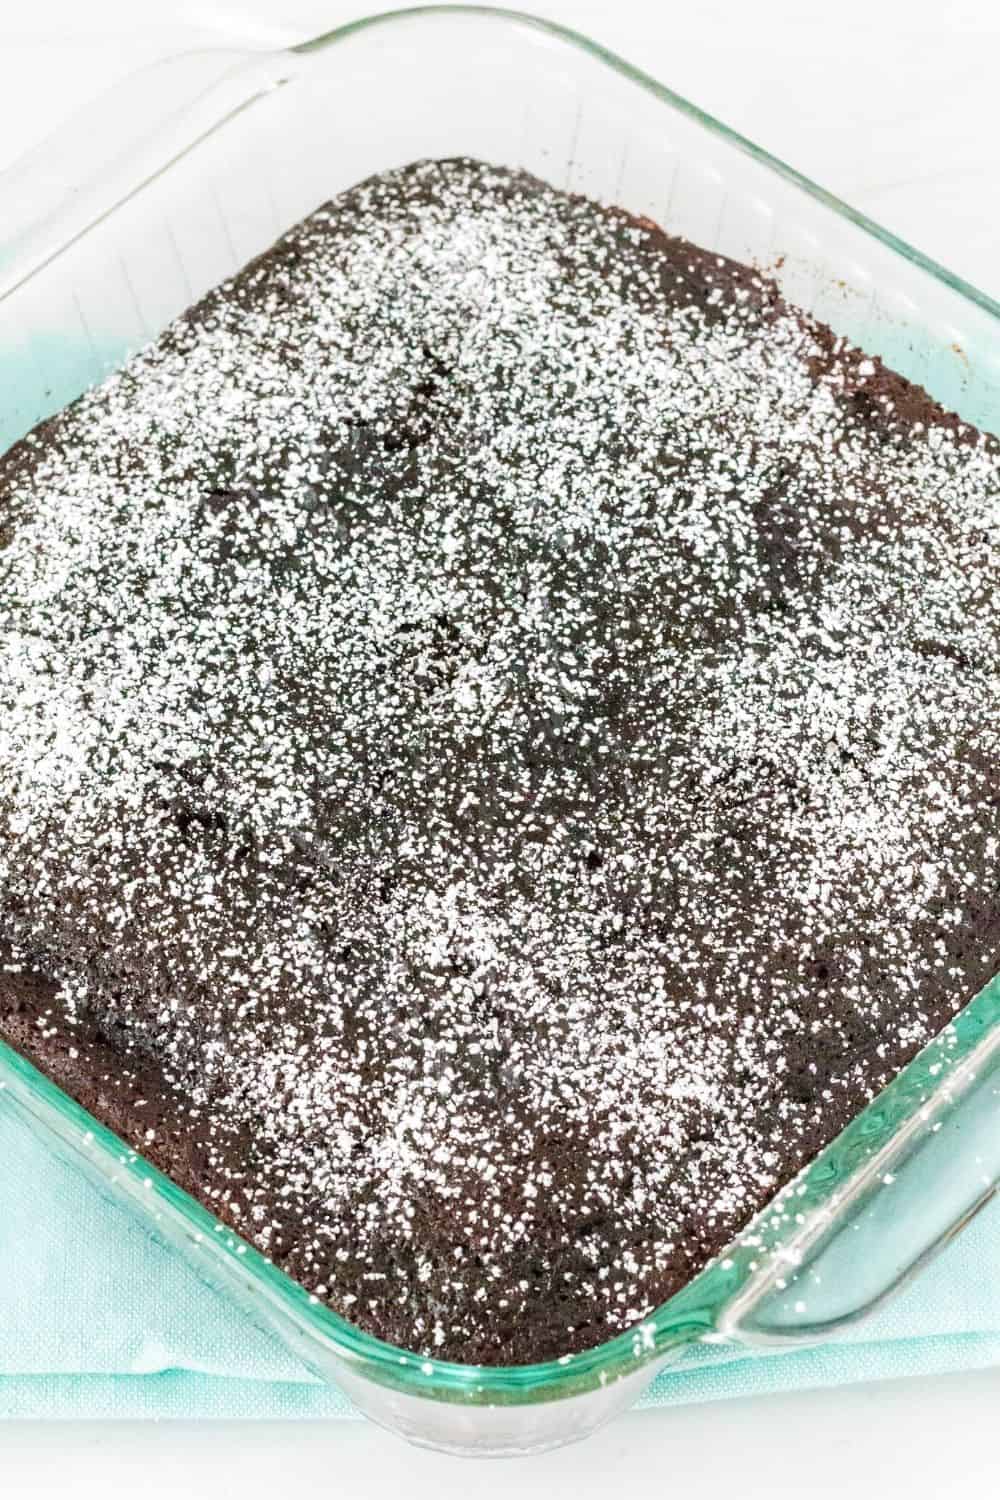 freshly baked chocolate cake from scratch in a square pan